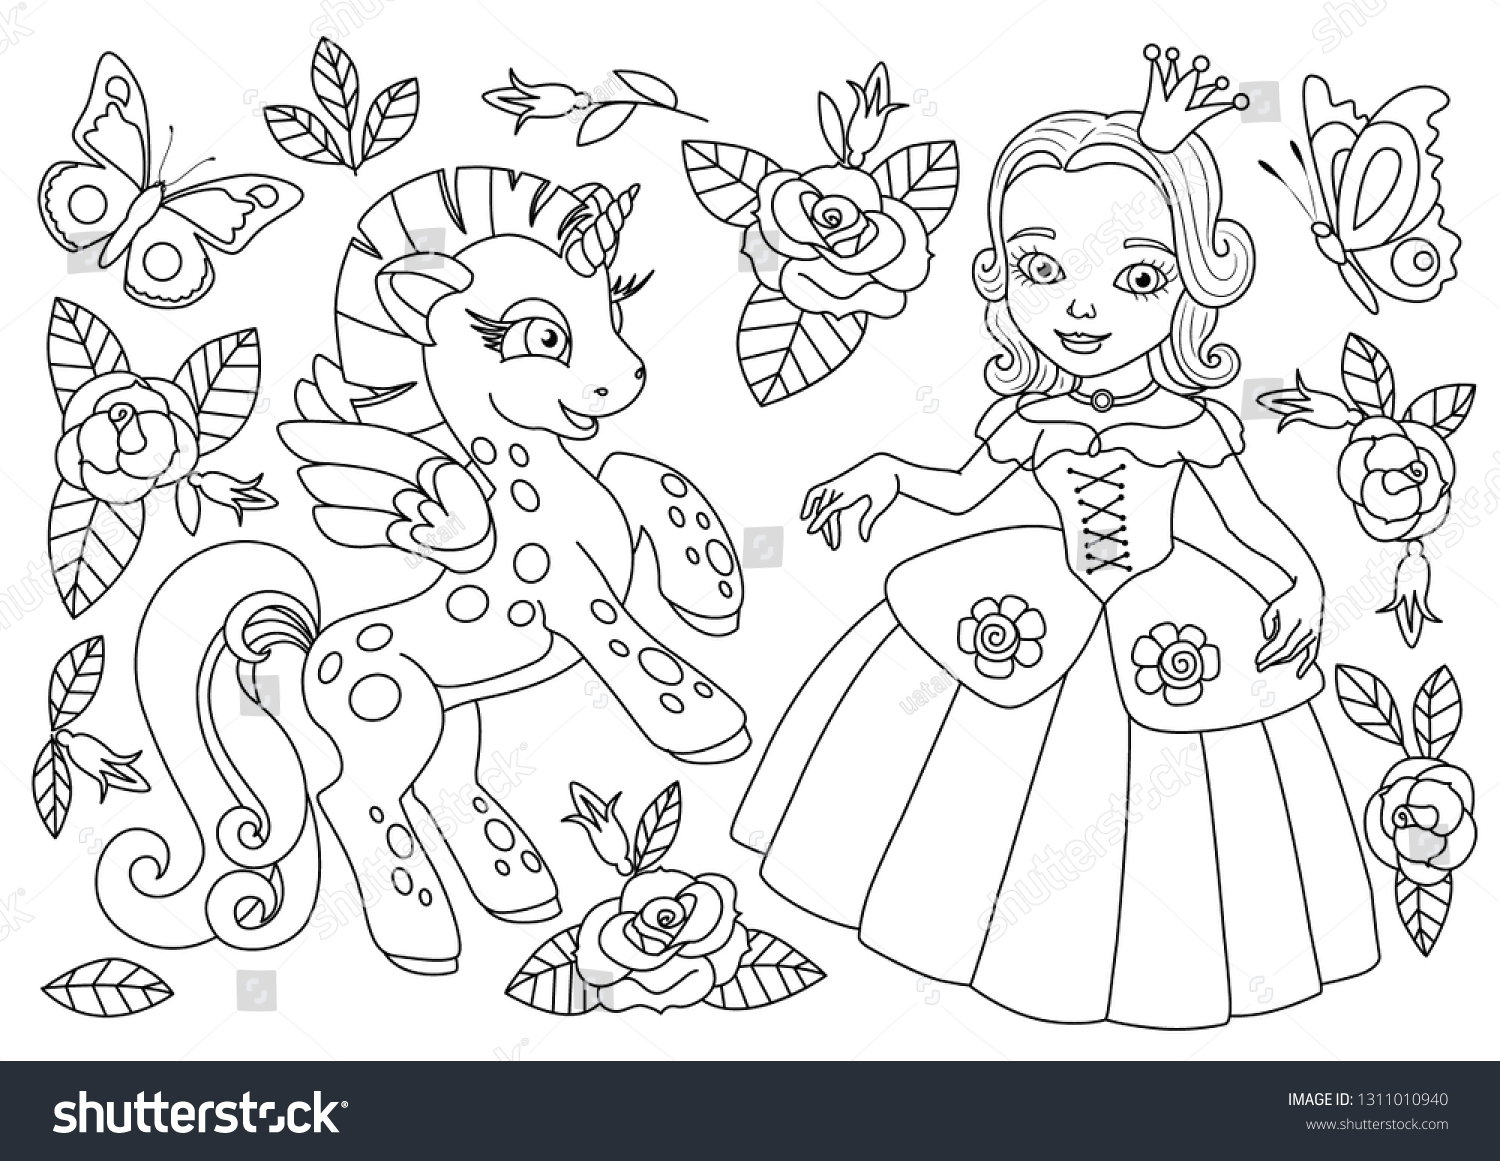 Princess Unicorn Coloring Page Coloring Page Stock Vector Royalty ...